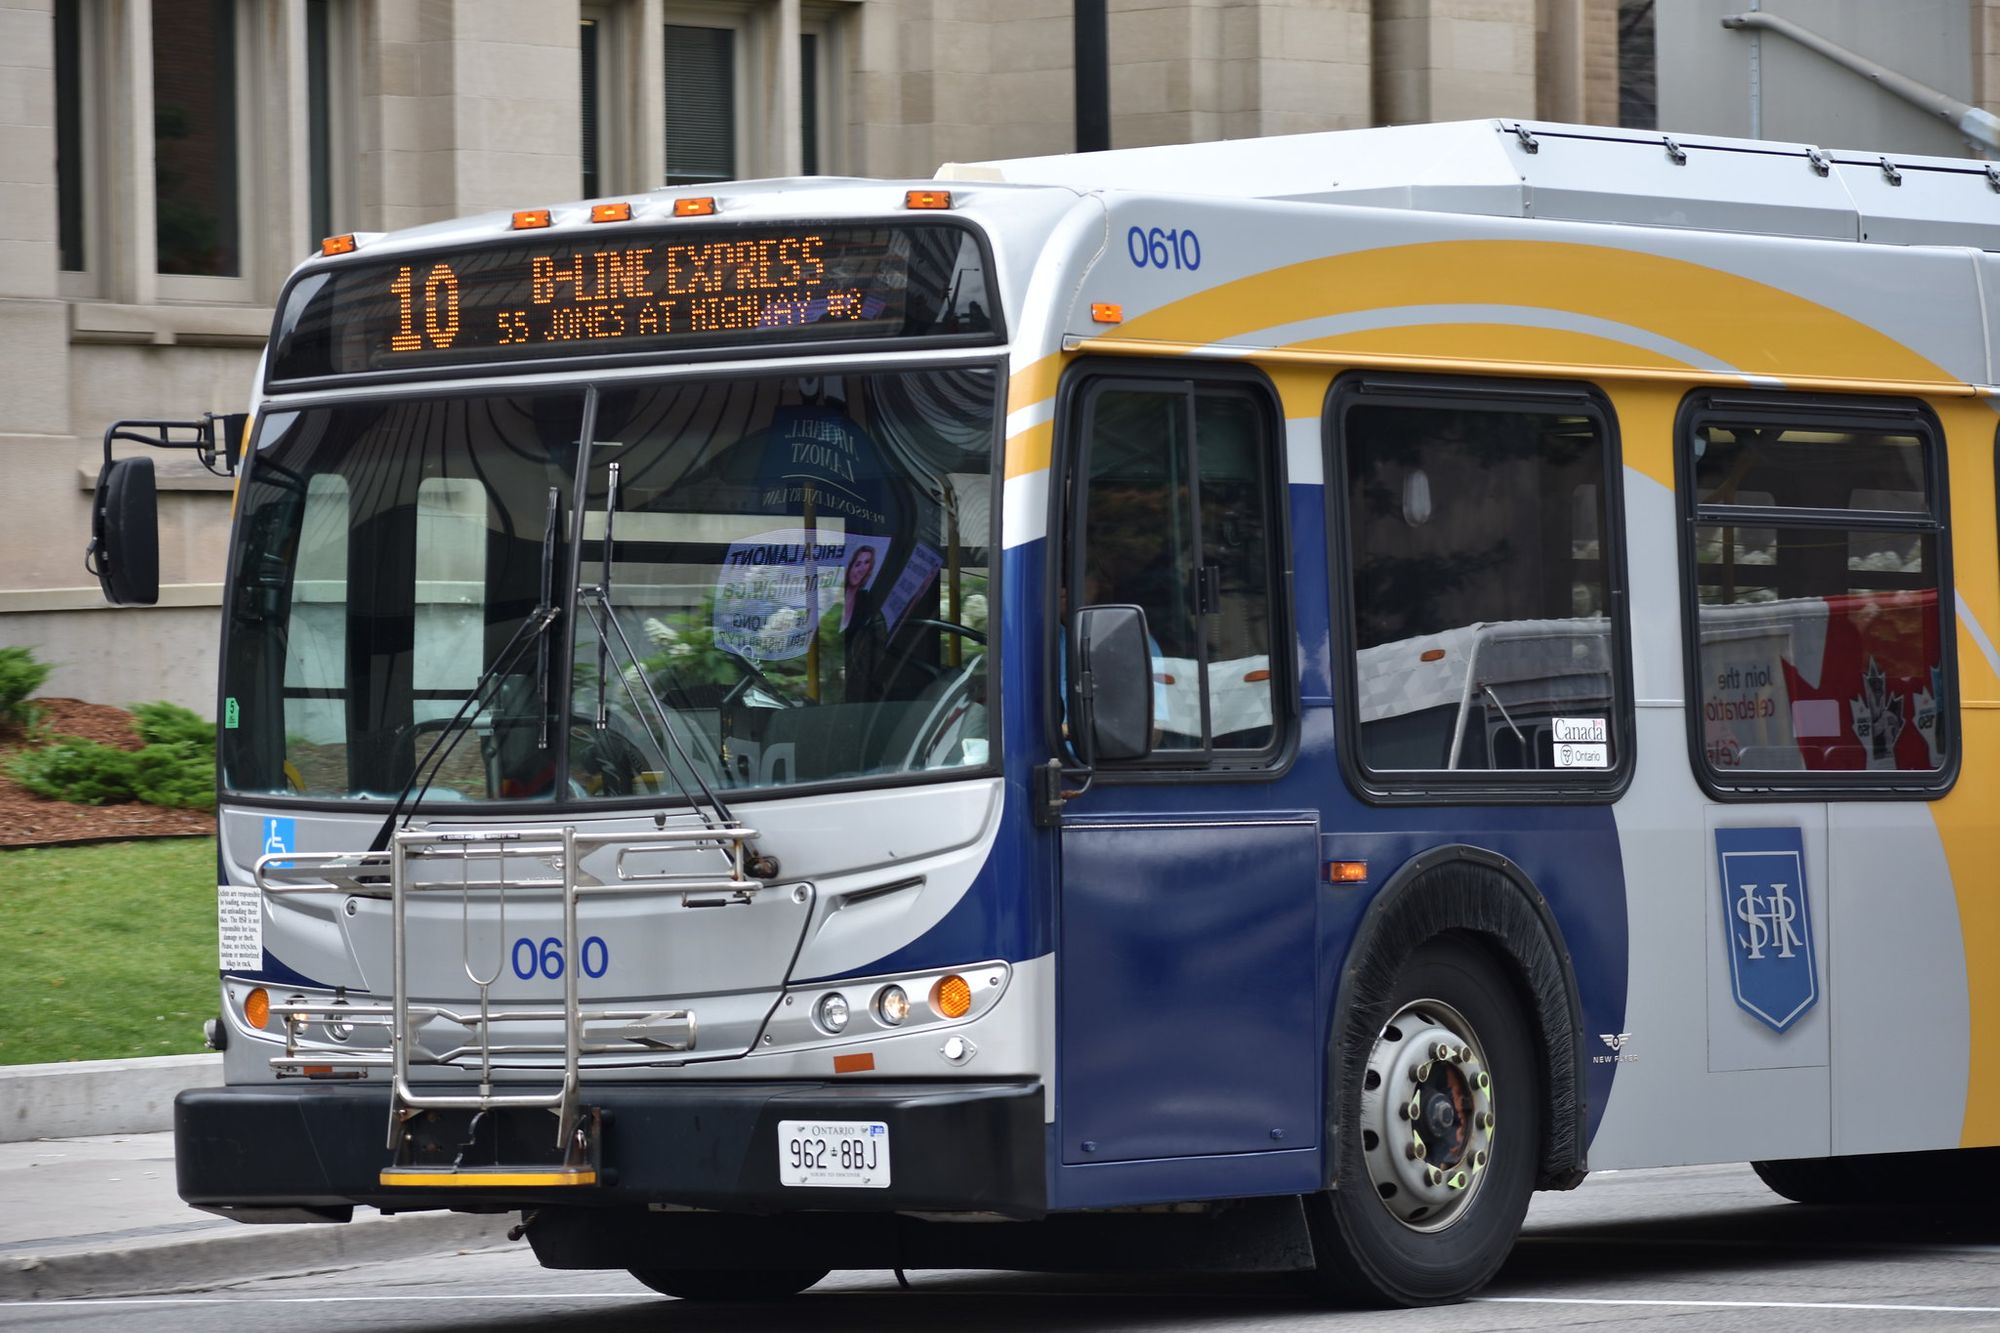 Coleman's Notes: Public Transit Capacity, Ridership, and Costs during Social Distancing